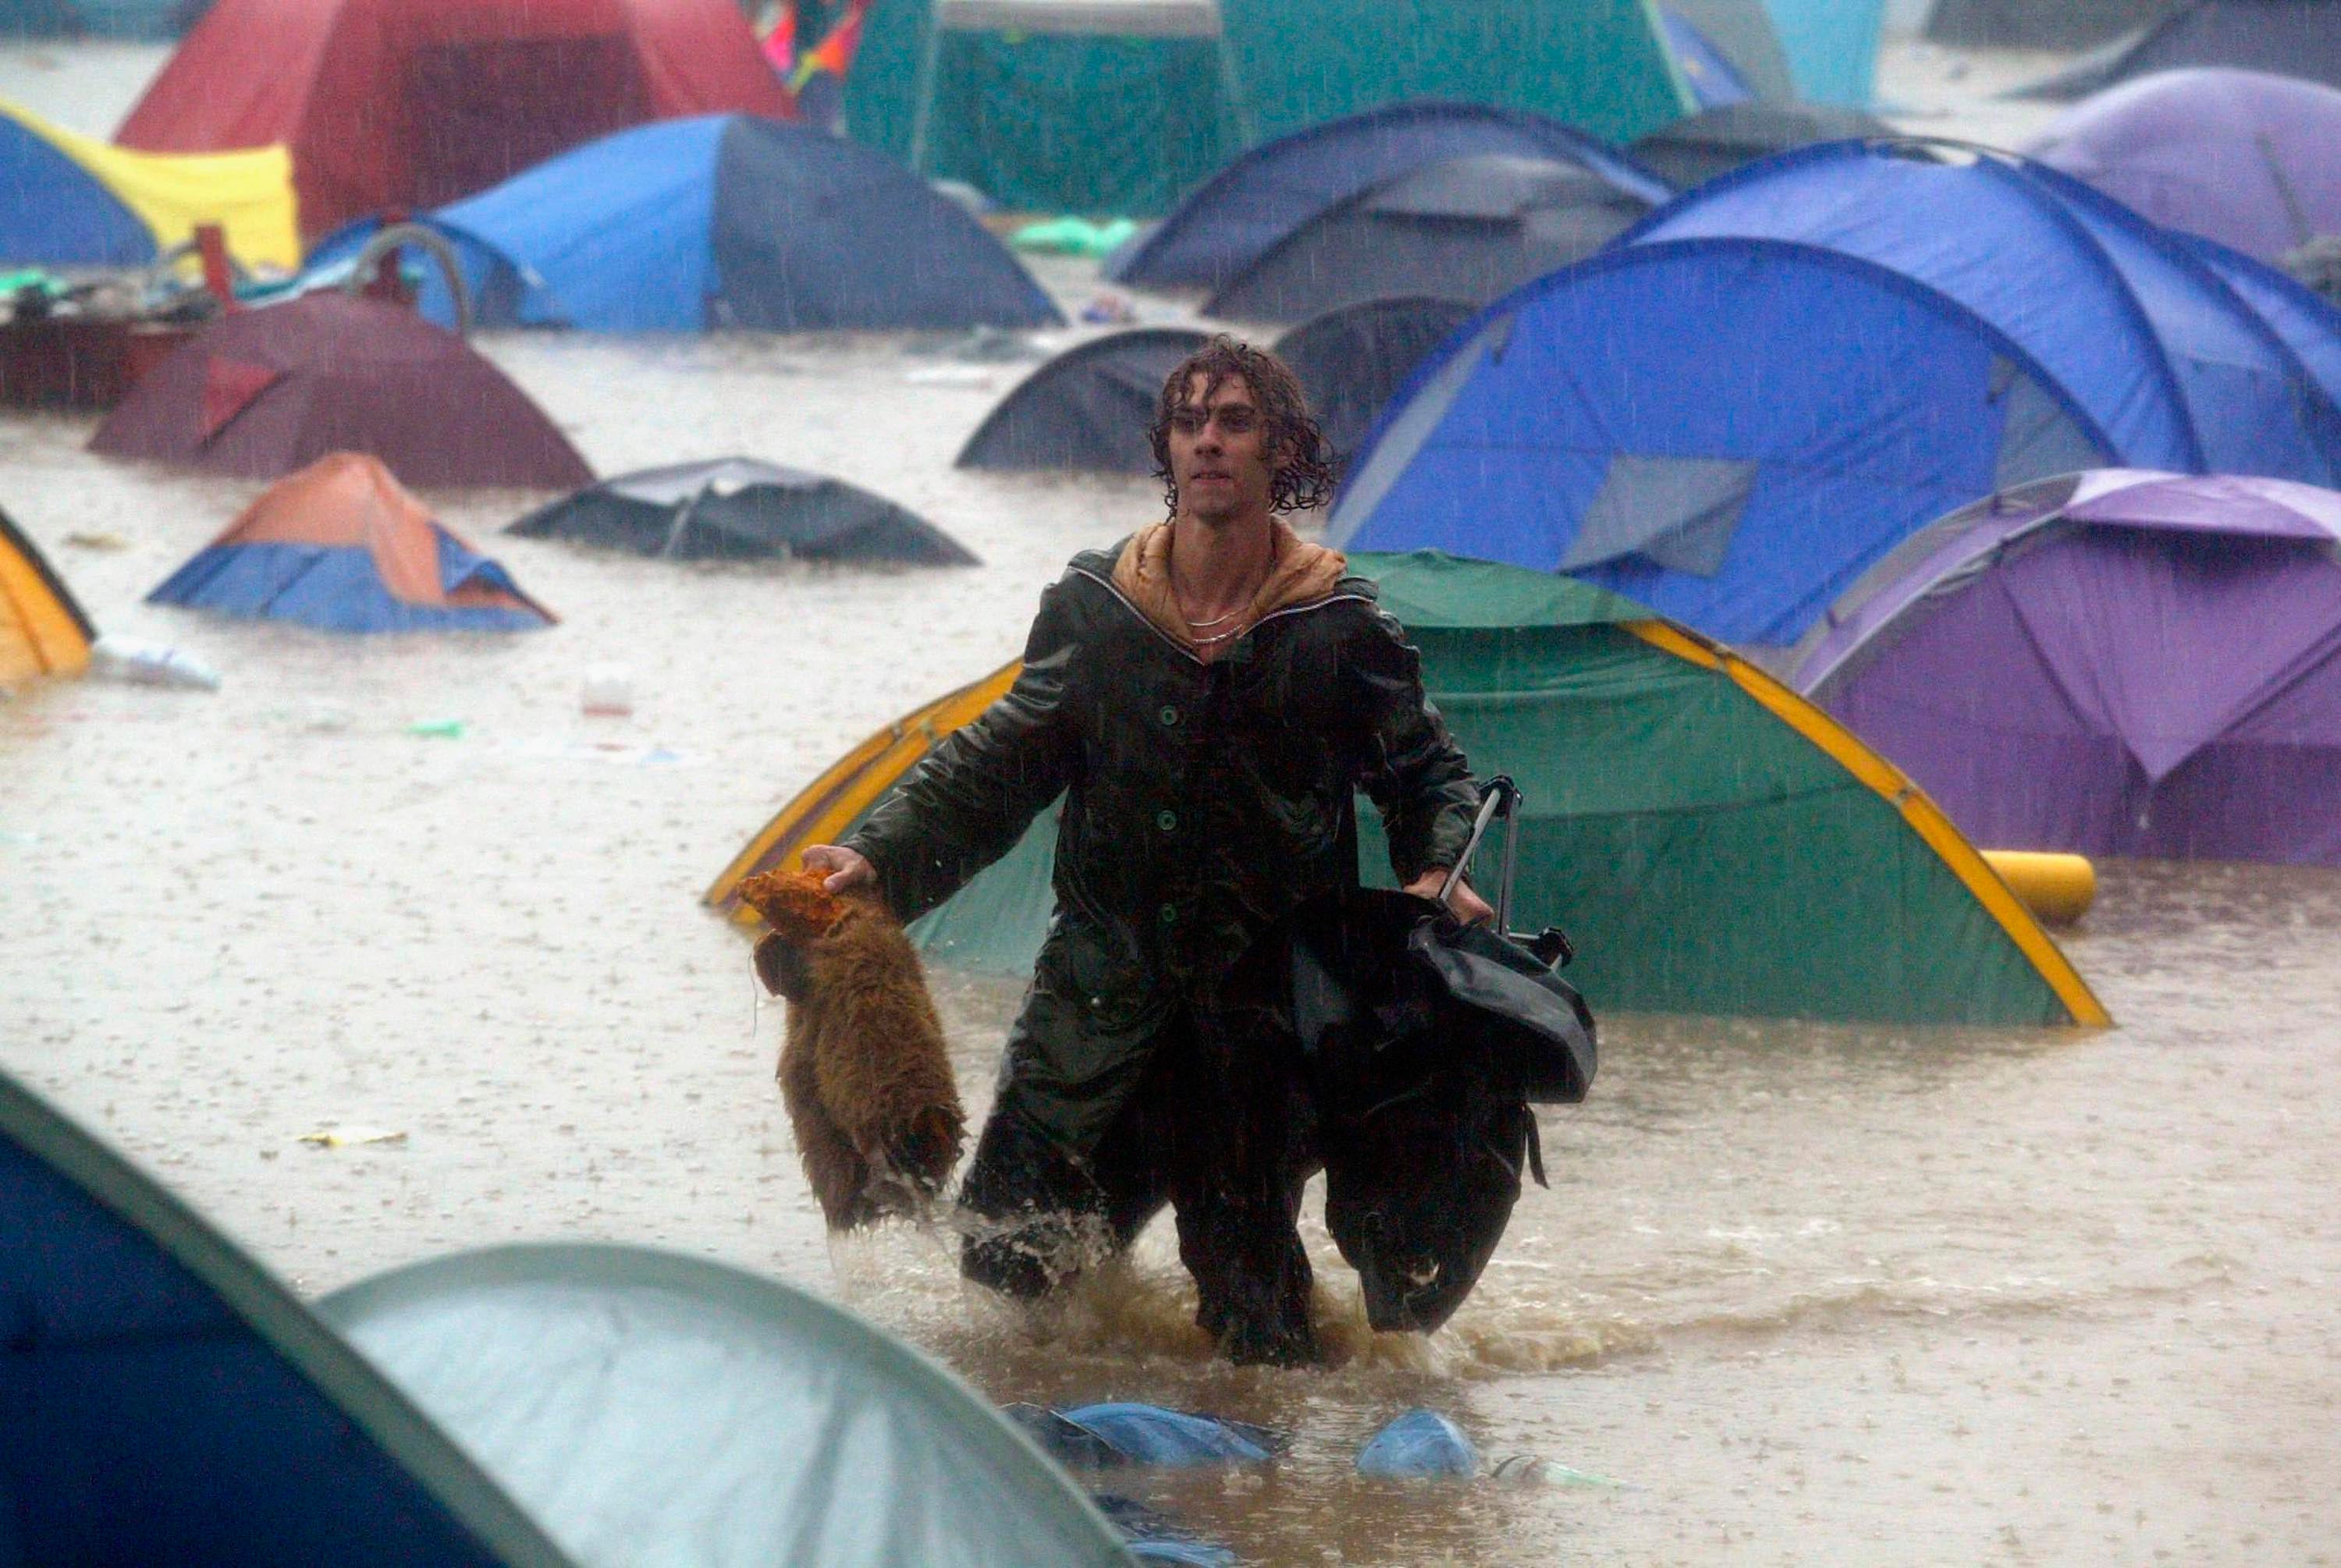 One unlucky festival-goer traipses through a sea of water and abandoned tents during 2005’s festival floods